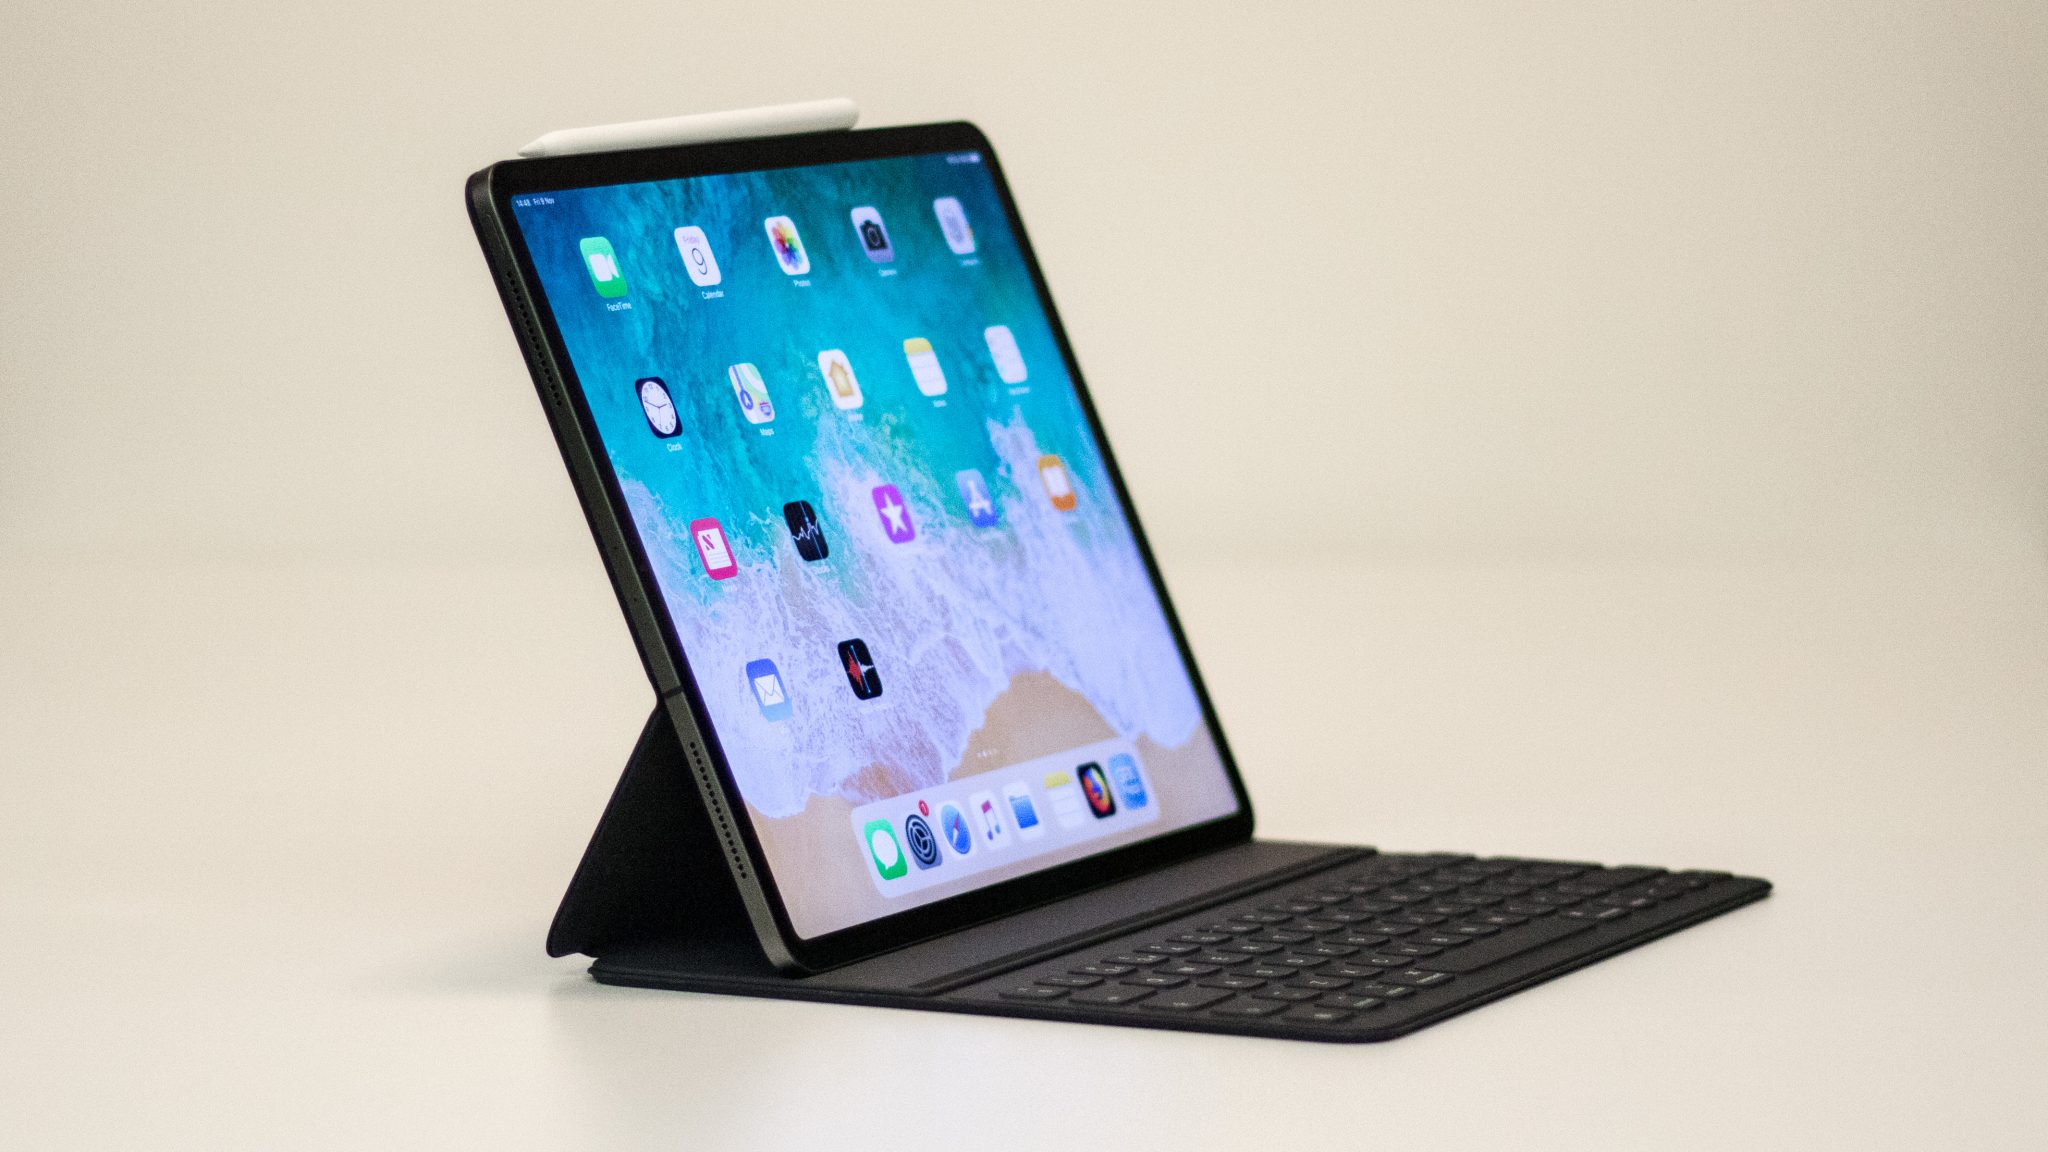 Tablet stand